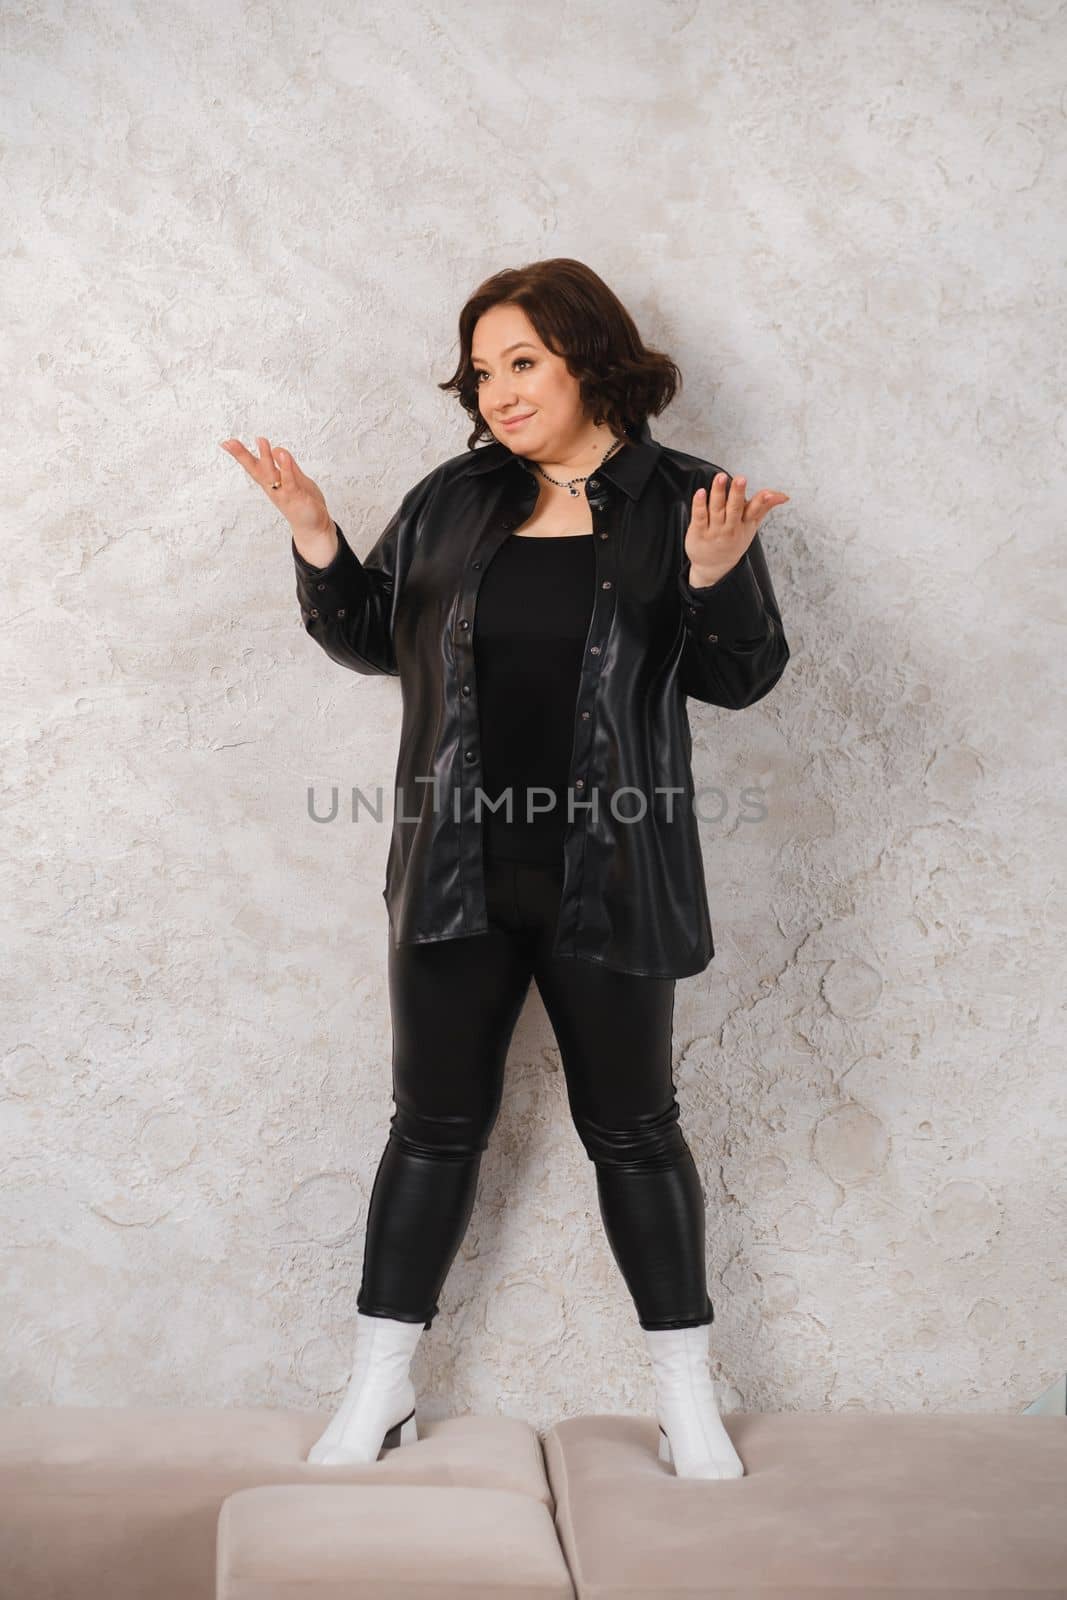 An adult woman in black leather clothes poses against a gray studio wall by Lobachad